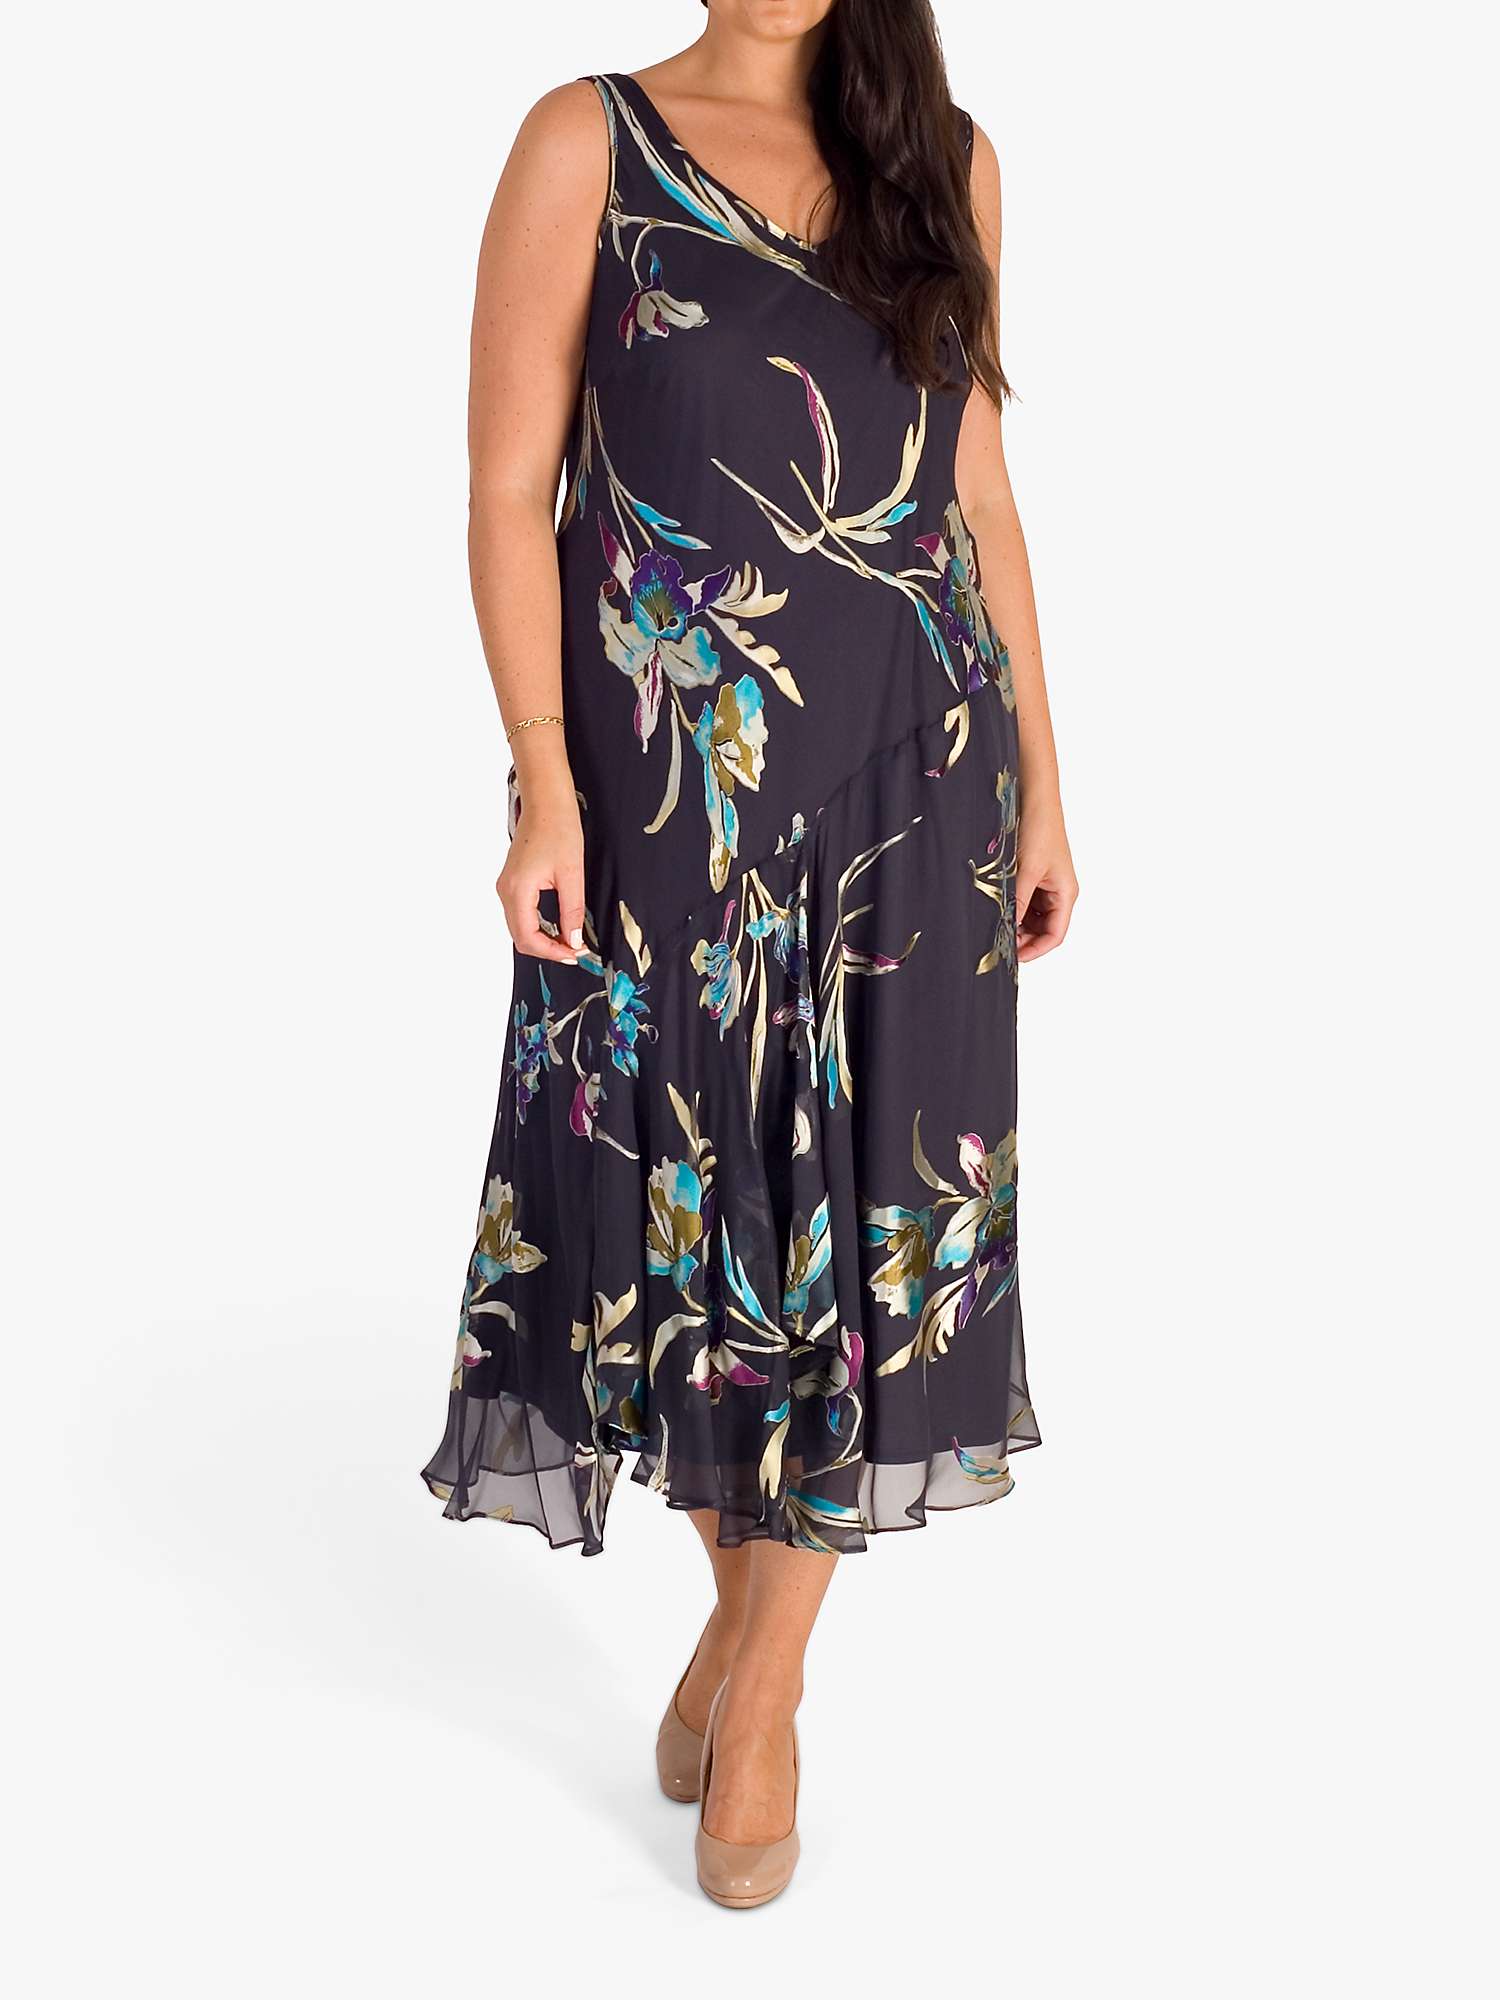 Buy chesca Devoree Floral Print Midi Dress, Pewter/Turquoise Online at johnlewis.com